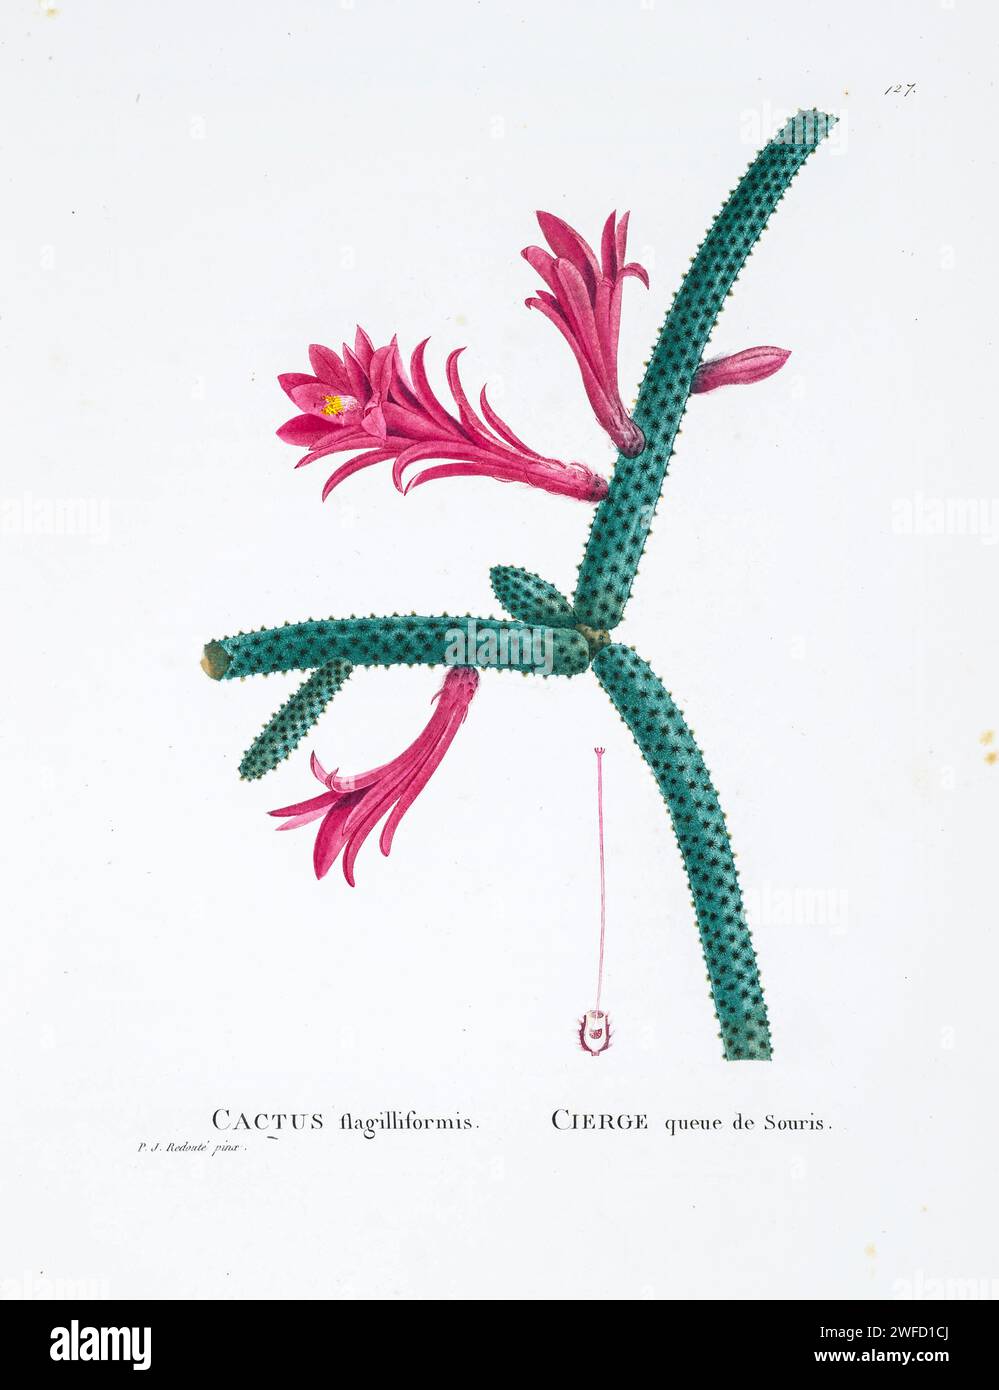 Aporocactus flagelliformis (L.) Lem. Here As Cactus flagelliformis (“‘ flagilliformis ’’ on plate) from History of Succulent Plants [Plantarum historia succulentarum / Histoire des plantes grasses] painted by Pierre-Joseph Redouté and described by Augustin Pyramus de Candolle 1799 Aporocactus flagelliformis, the rattail cactus, is a species of flowering plant in the cactus family Cactaceae, and is the most cultivated species in the genus Aporocactus. Due to its ease of cultivation and attractive floral displays, it is Stock Photo